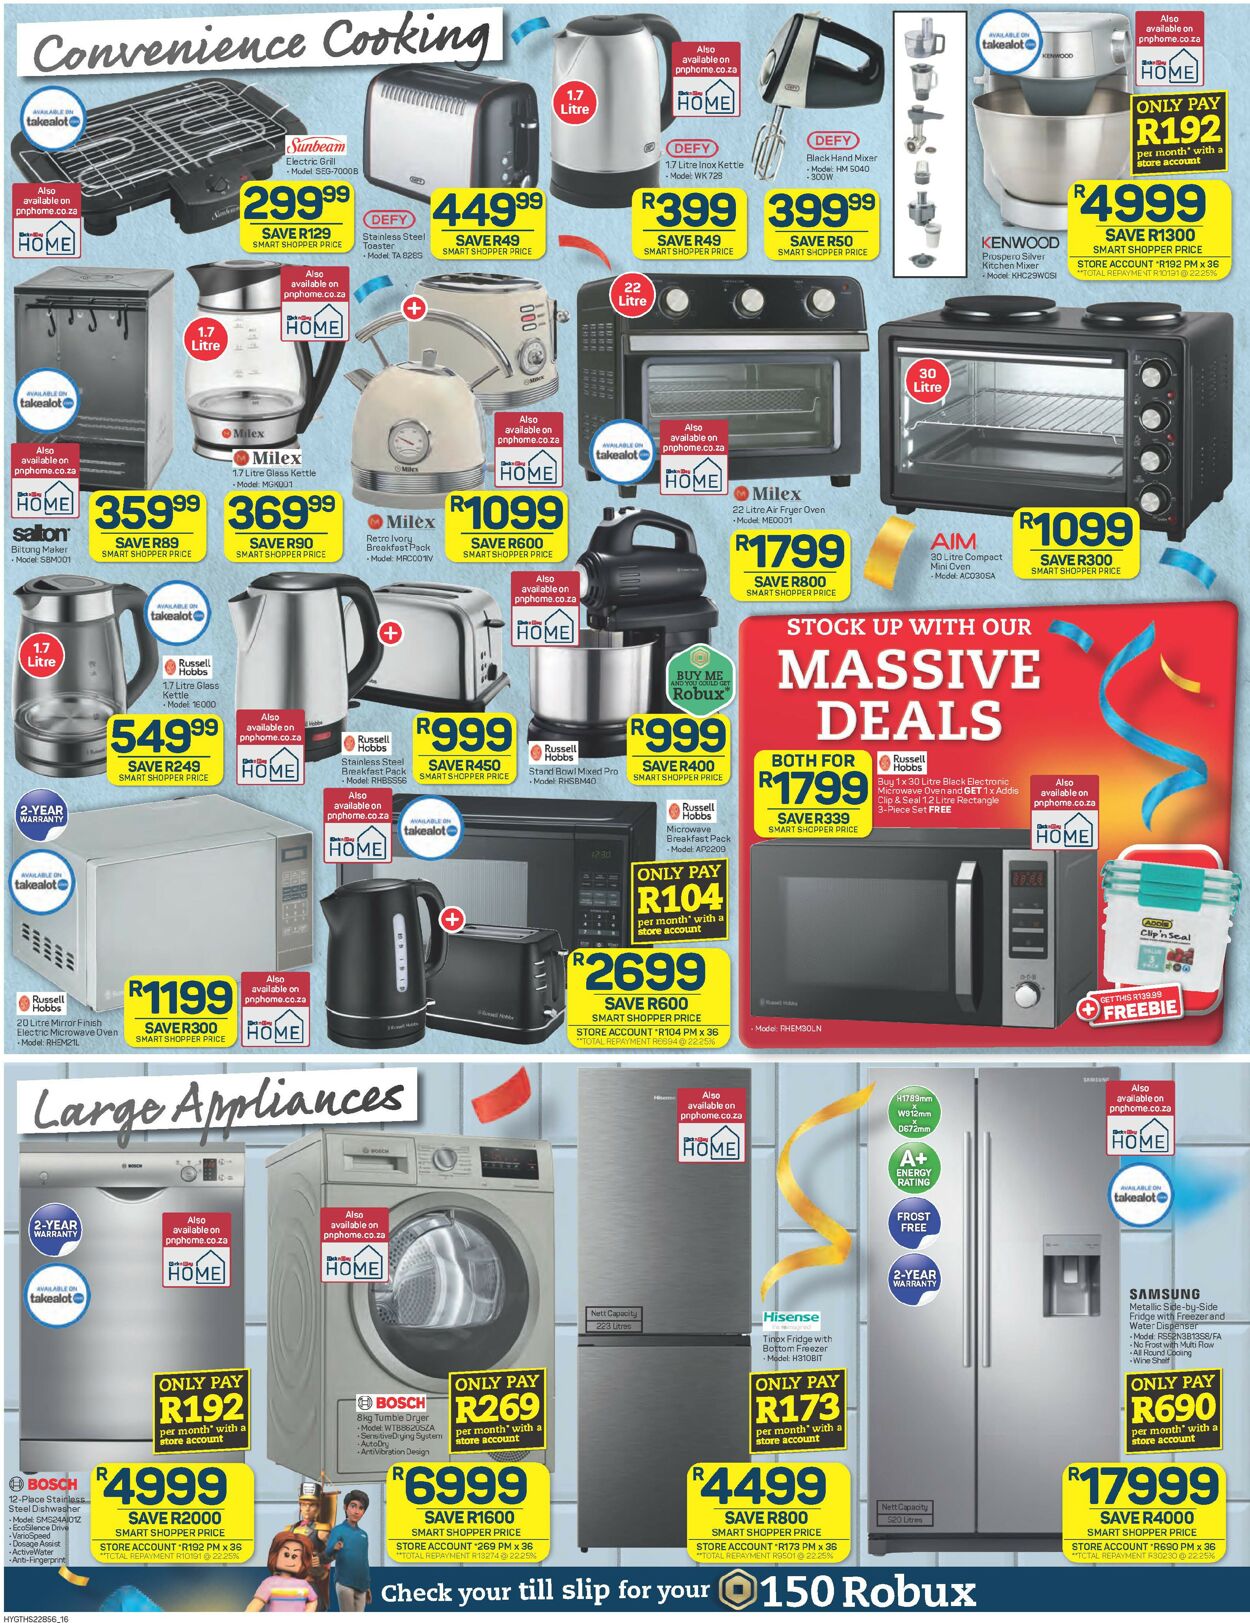 Pick n Pay Catalogue - 2023/06/19-2023/06/25 (Page 16)